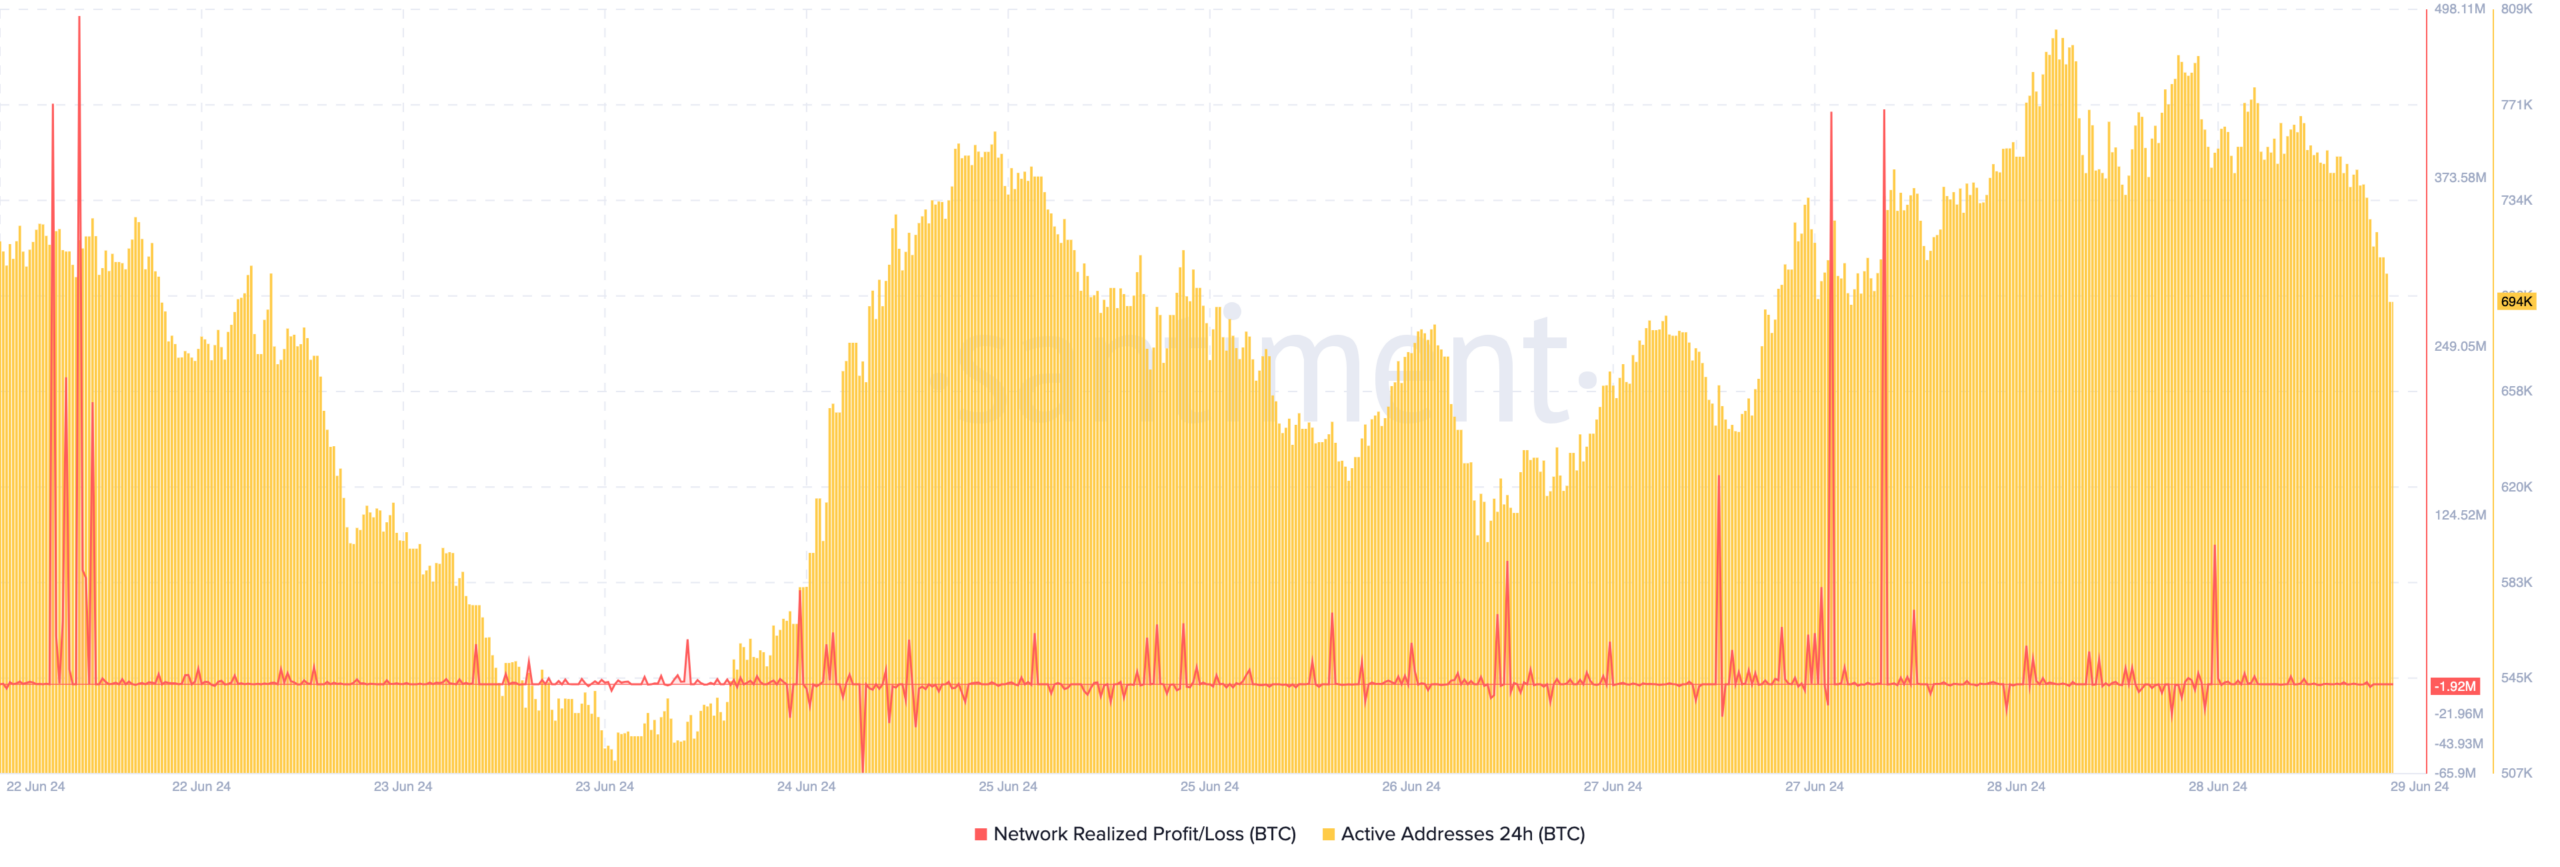 Bitcoin network activity is declining.